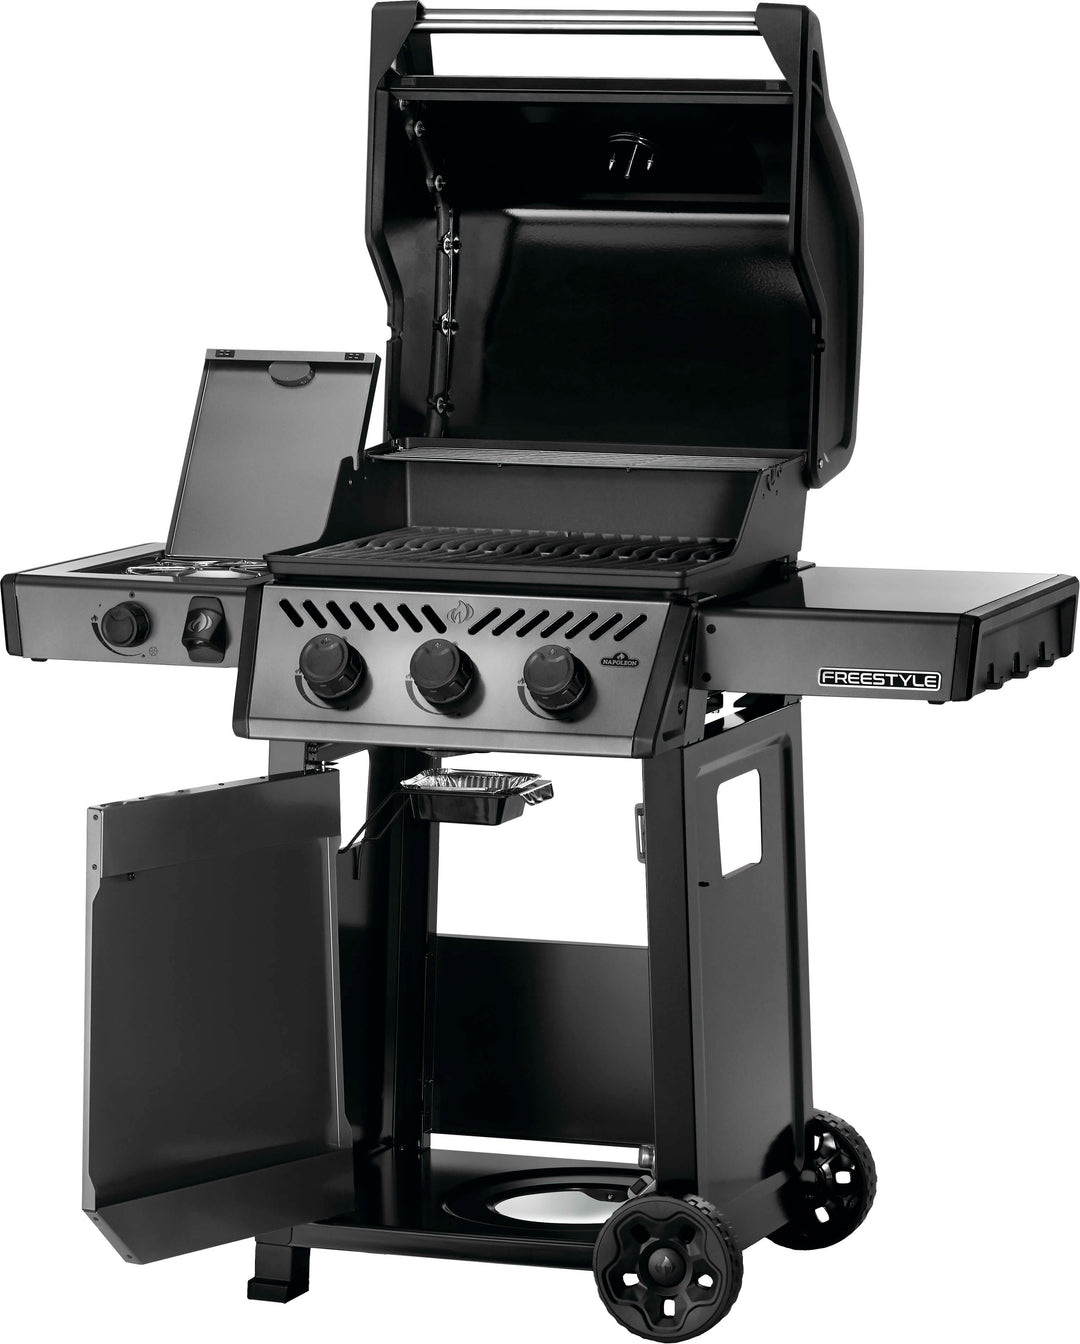 Napoleon - Freestyle 365 Propane Gas Grill with Side Burner - Graphite Grey_2